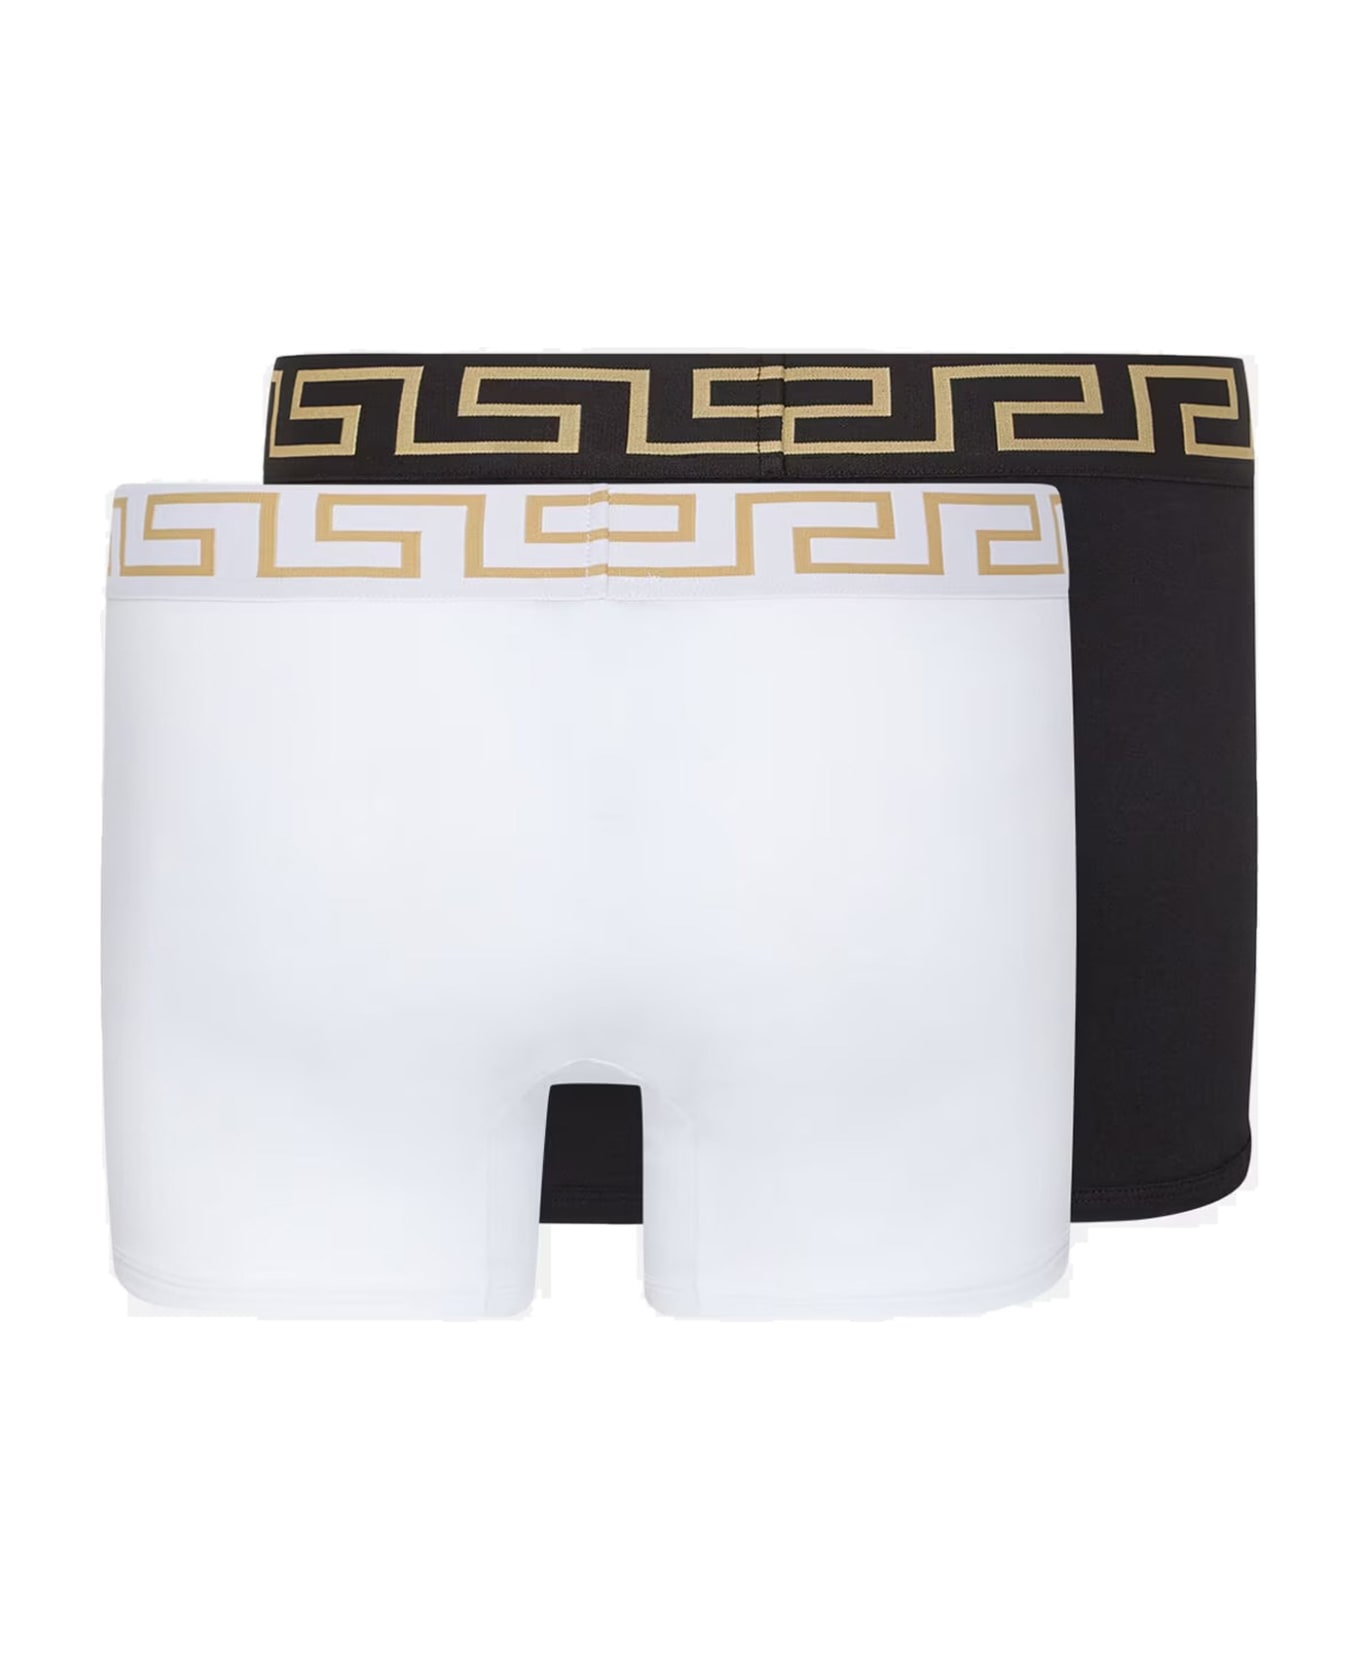 Versace Pack Of Two Boxer Shorts With Greek Motif - BK/WT